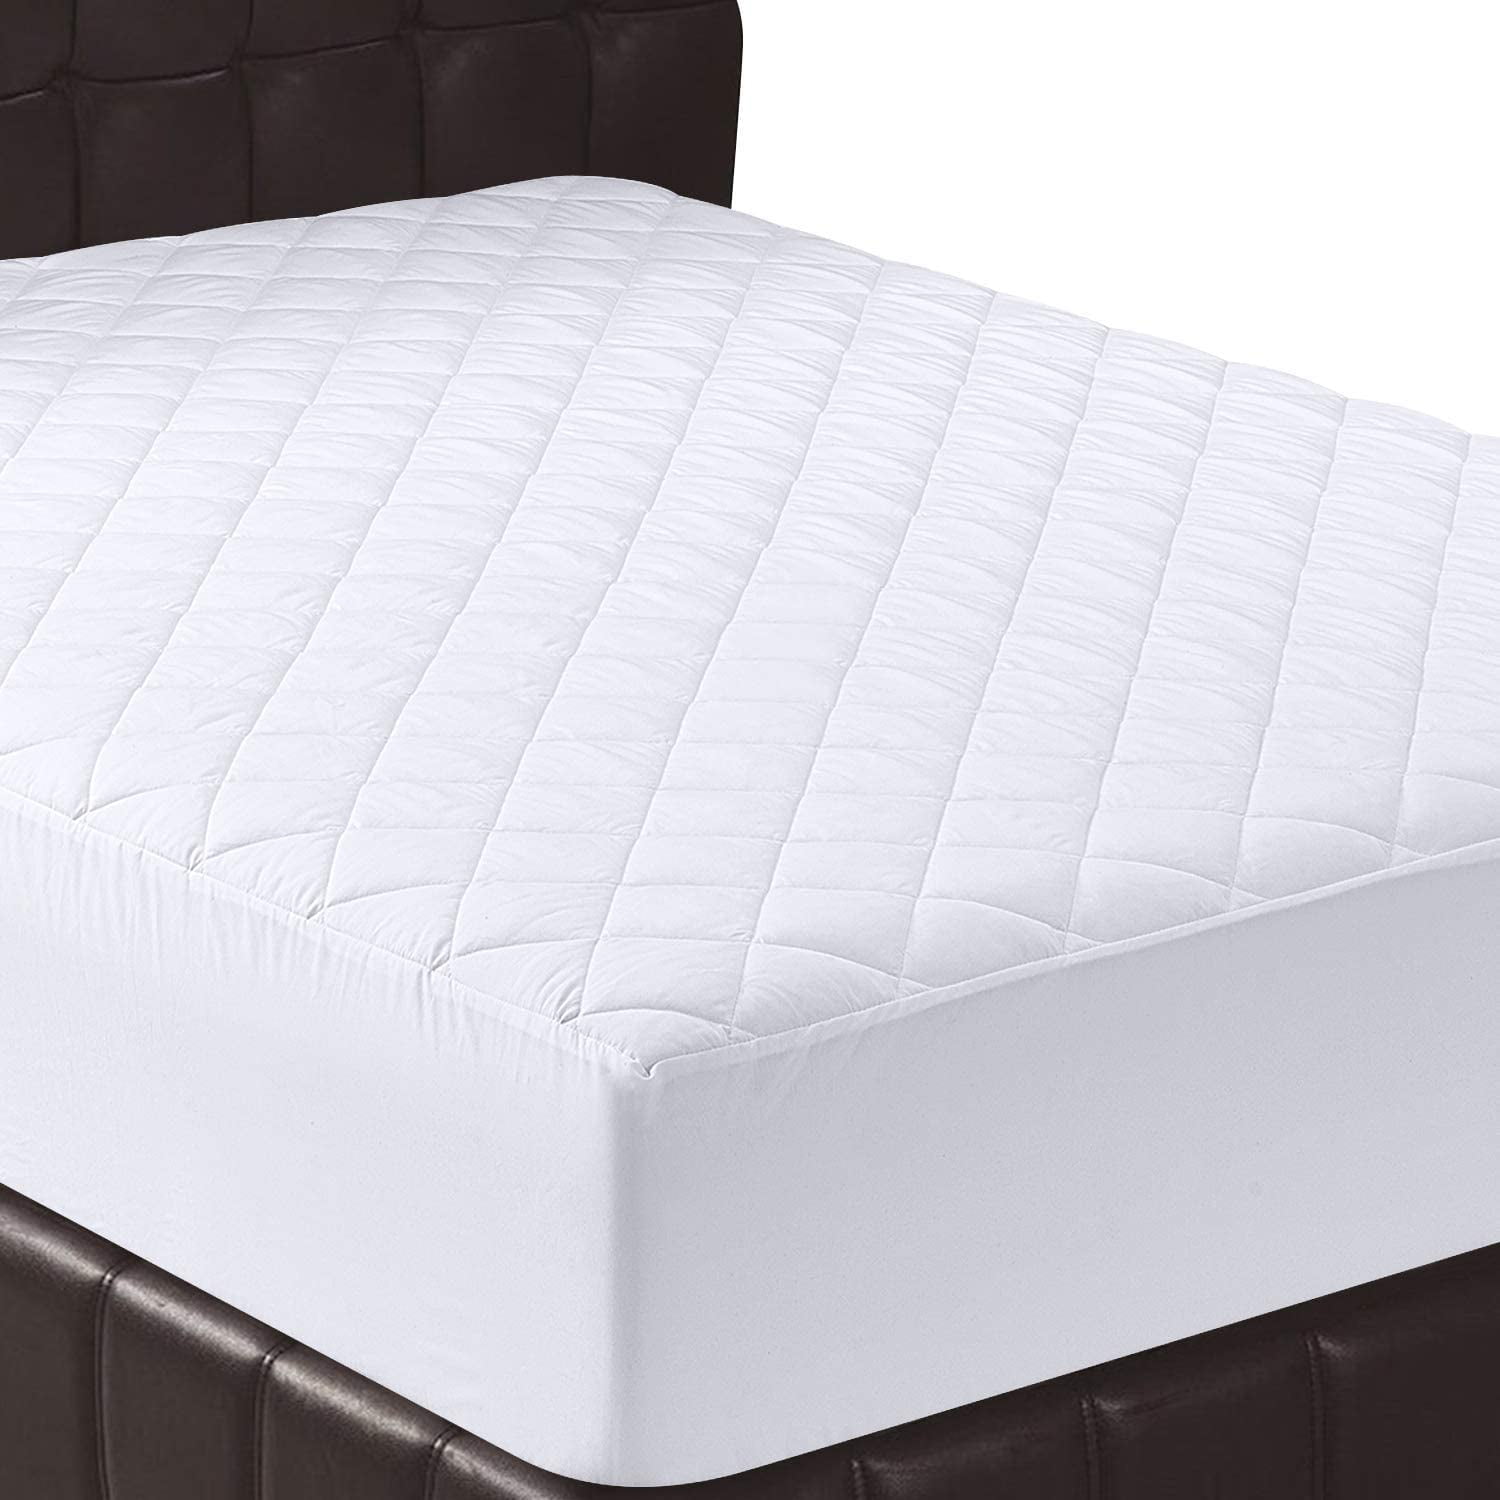 Utopia Bedding Quilted Fitted Mattress, King Size Bed Mattress Topper